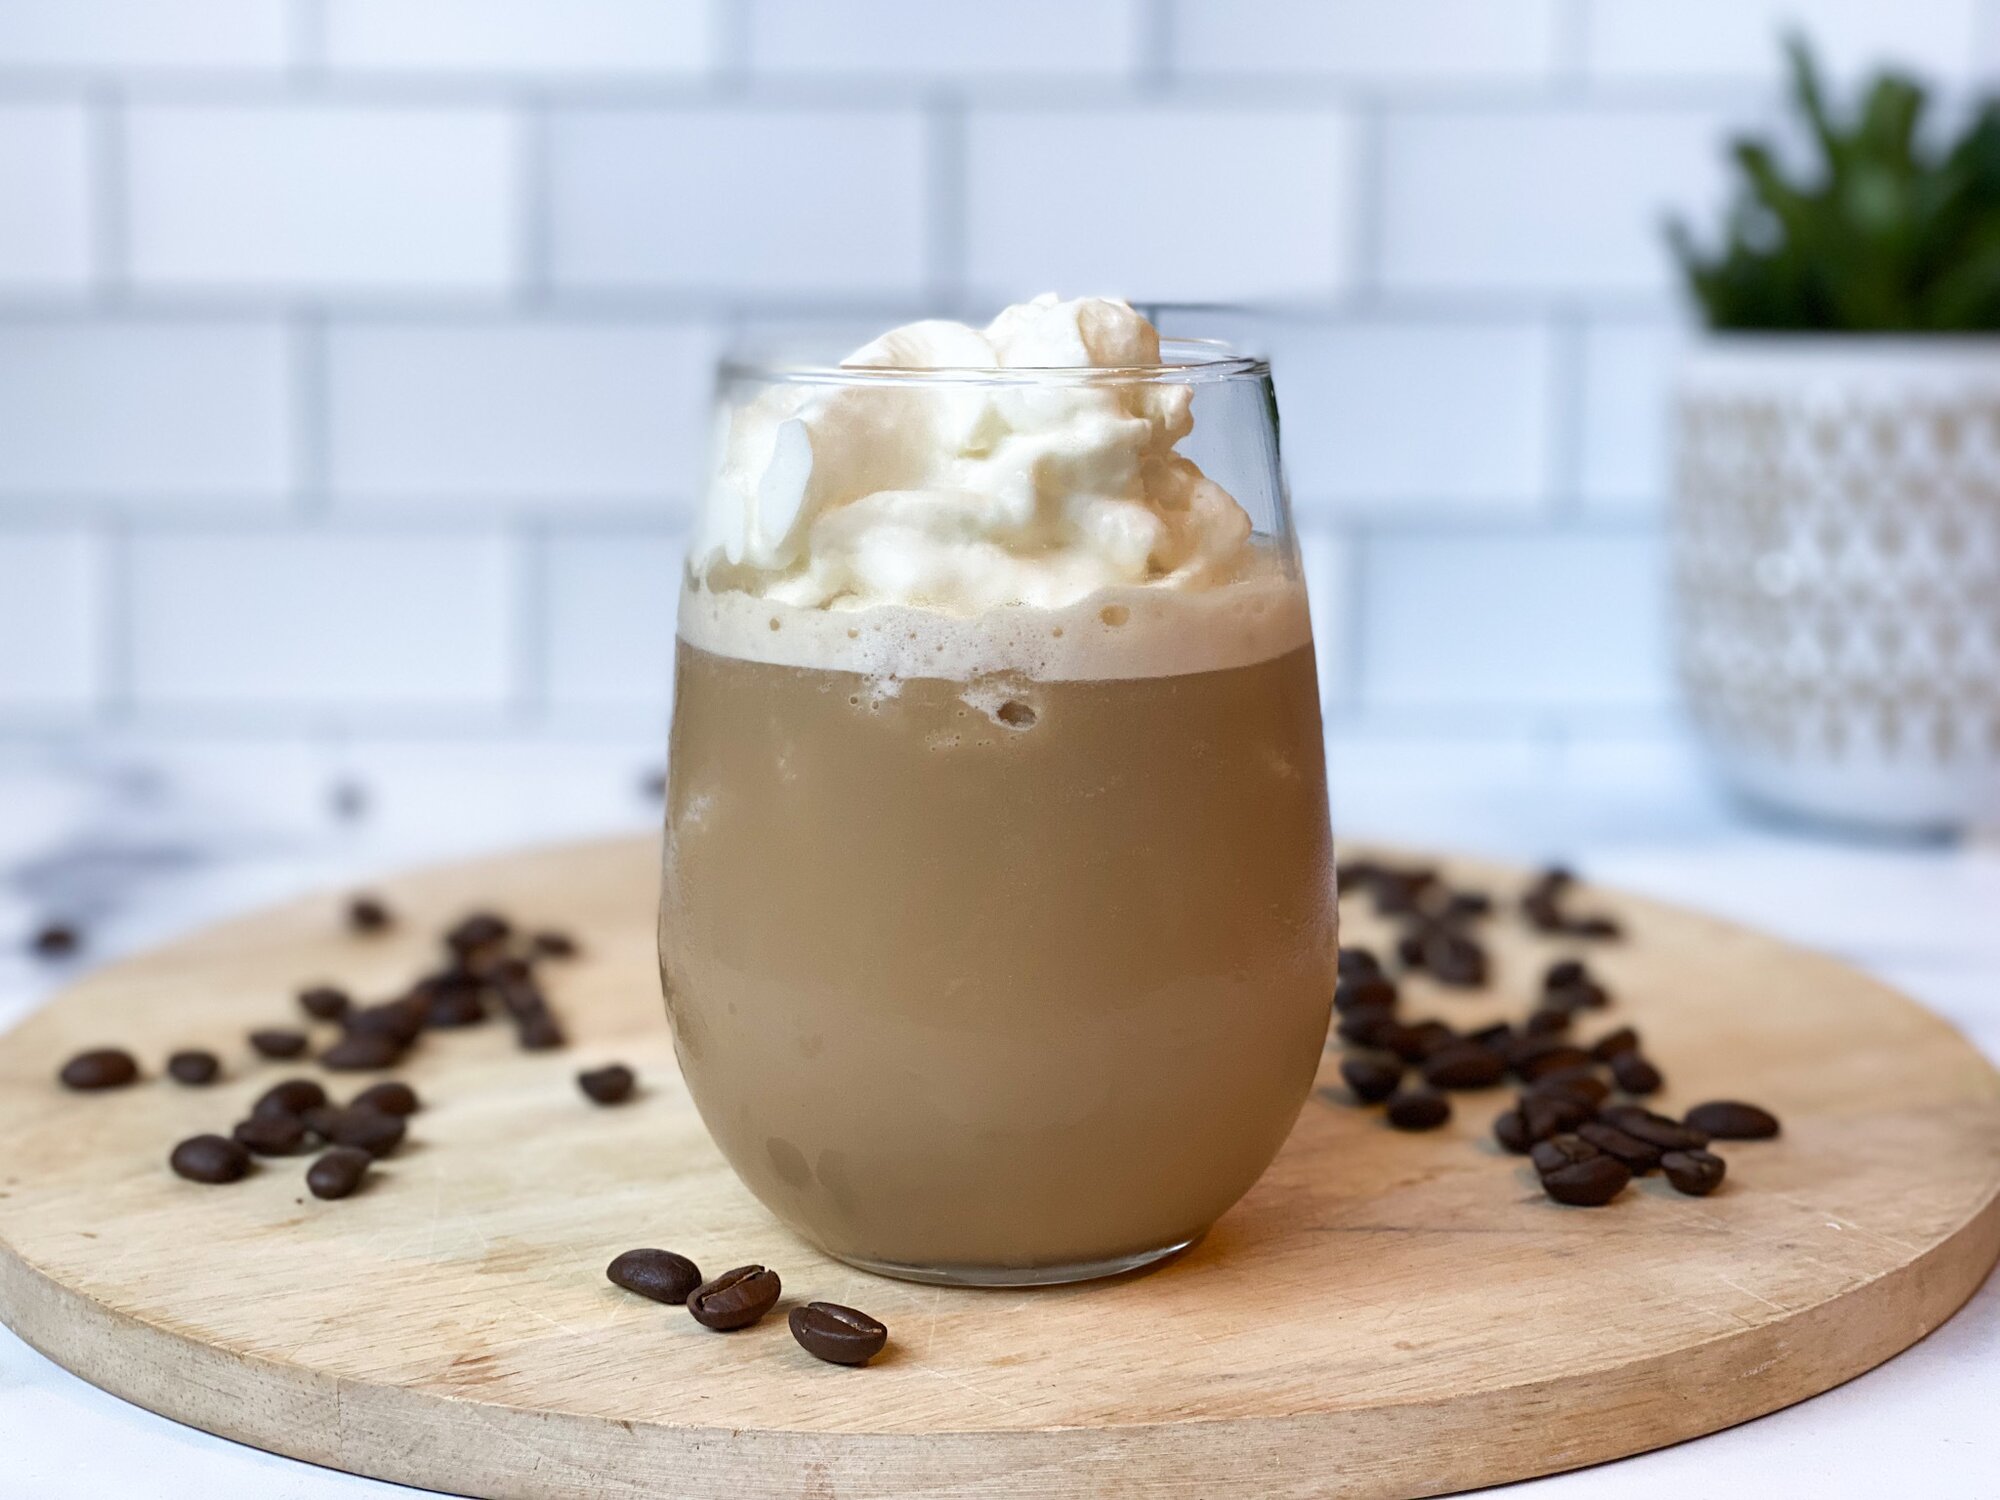 A close up shot of the Blended Vanilla Frappuccino on a wooden board with coffee beans in the background